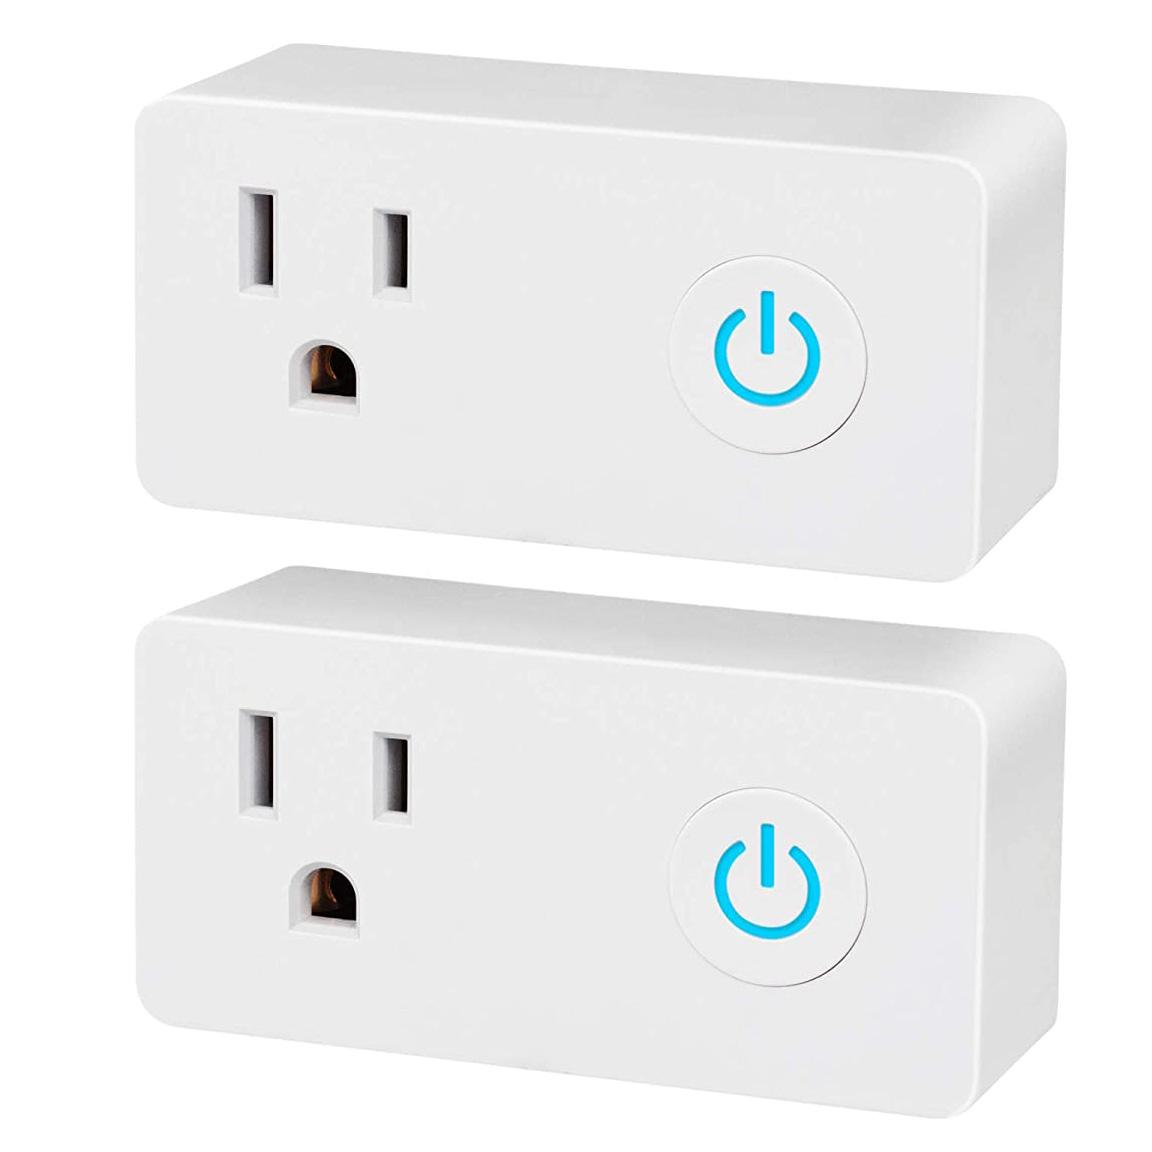 2 Google Assistant and Alexa Smart Plug Outlets for $11.19